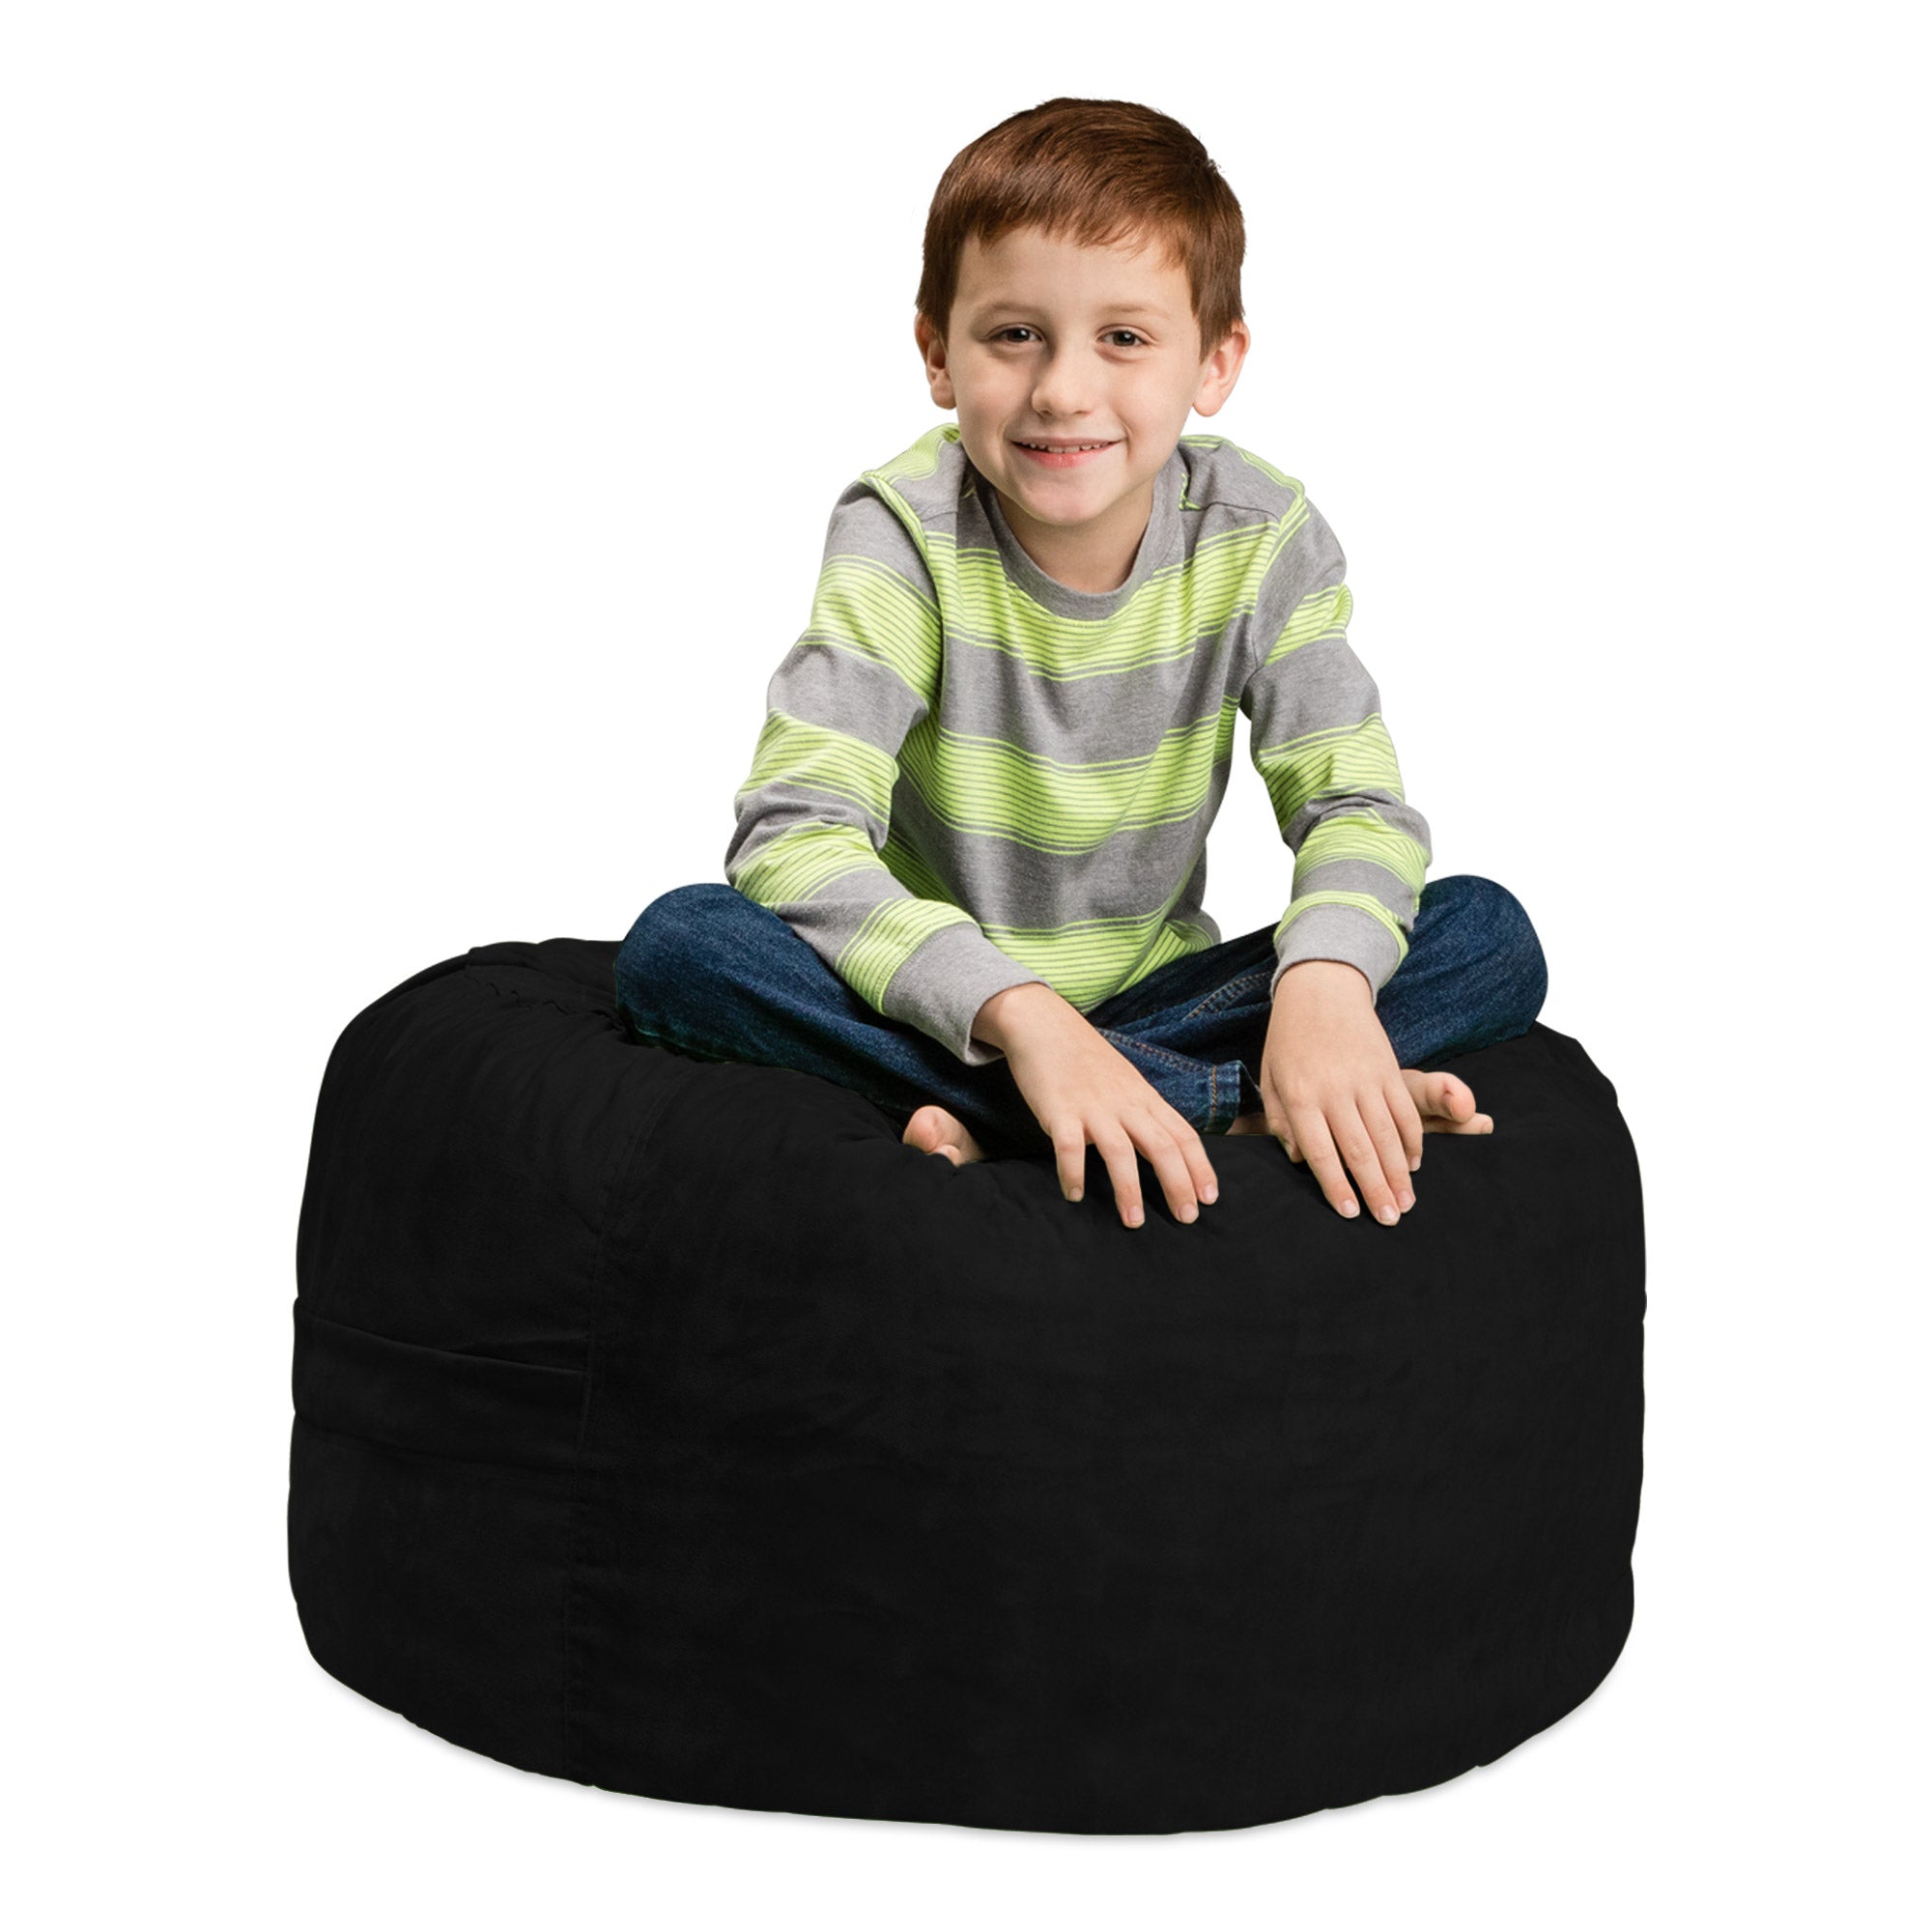 Soft and supportive Bean bag cover Easily morphable and lightweight Perfect  for Den room dcor, family rooms, rec rooms, or home theaters. It's like  floating on the moon. The stretchable Polyester-Spandex material